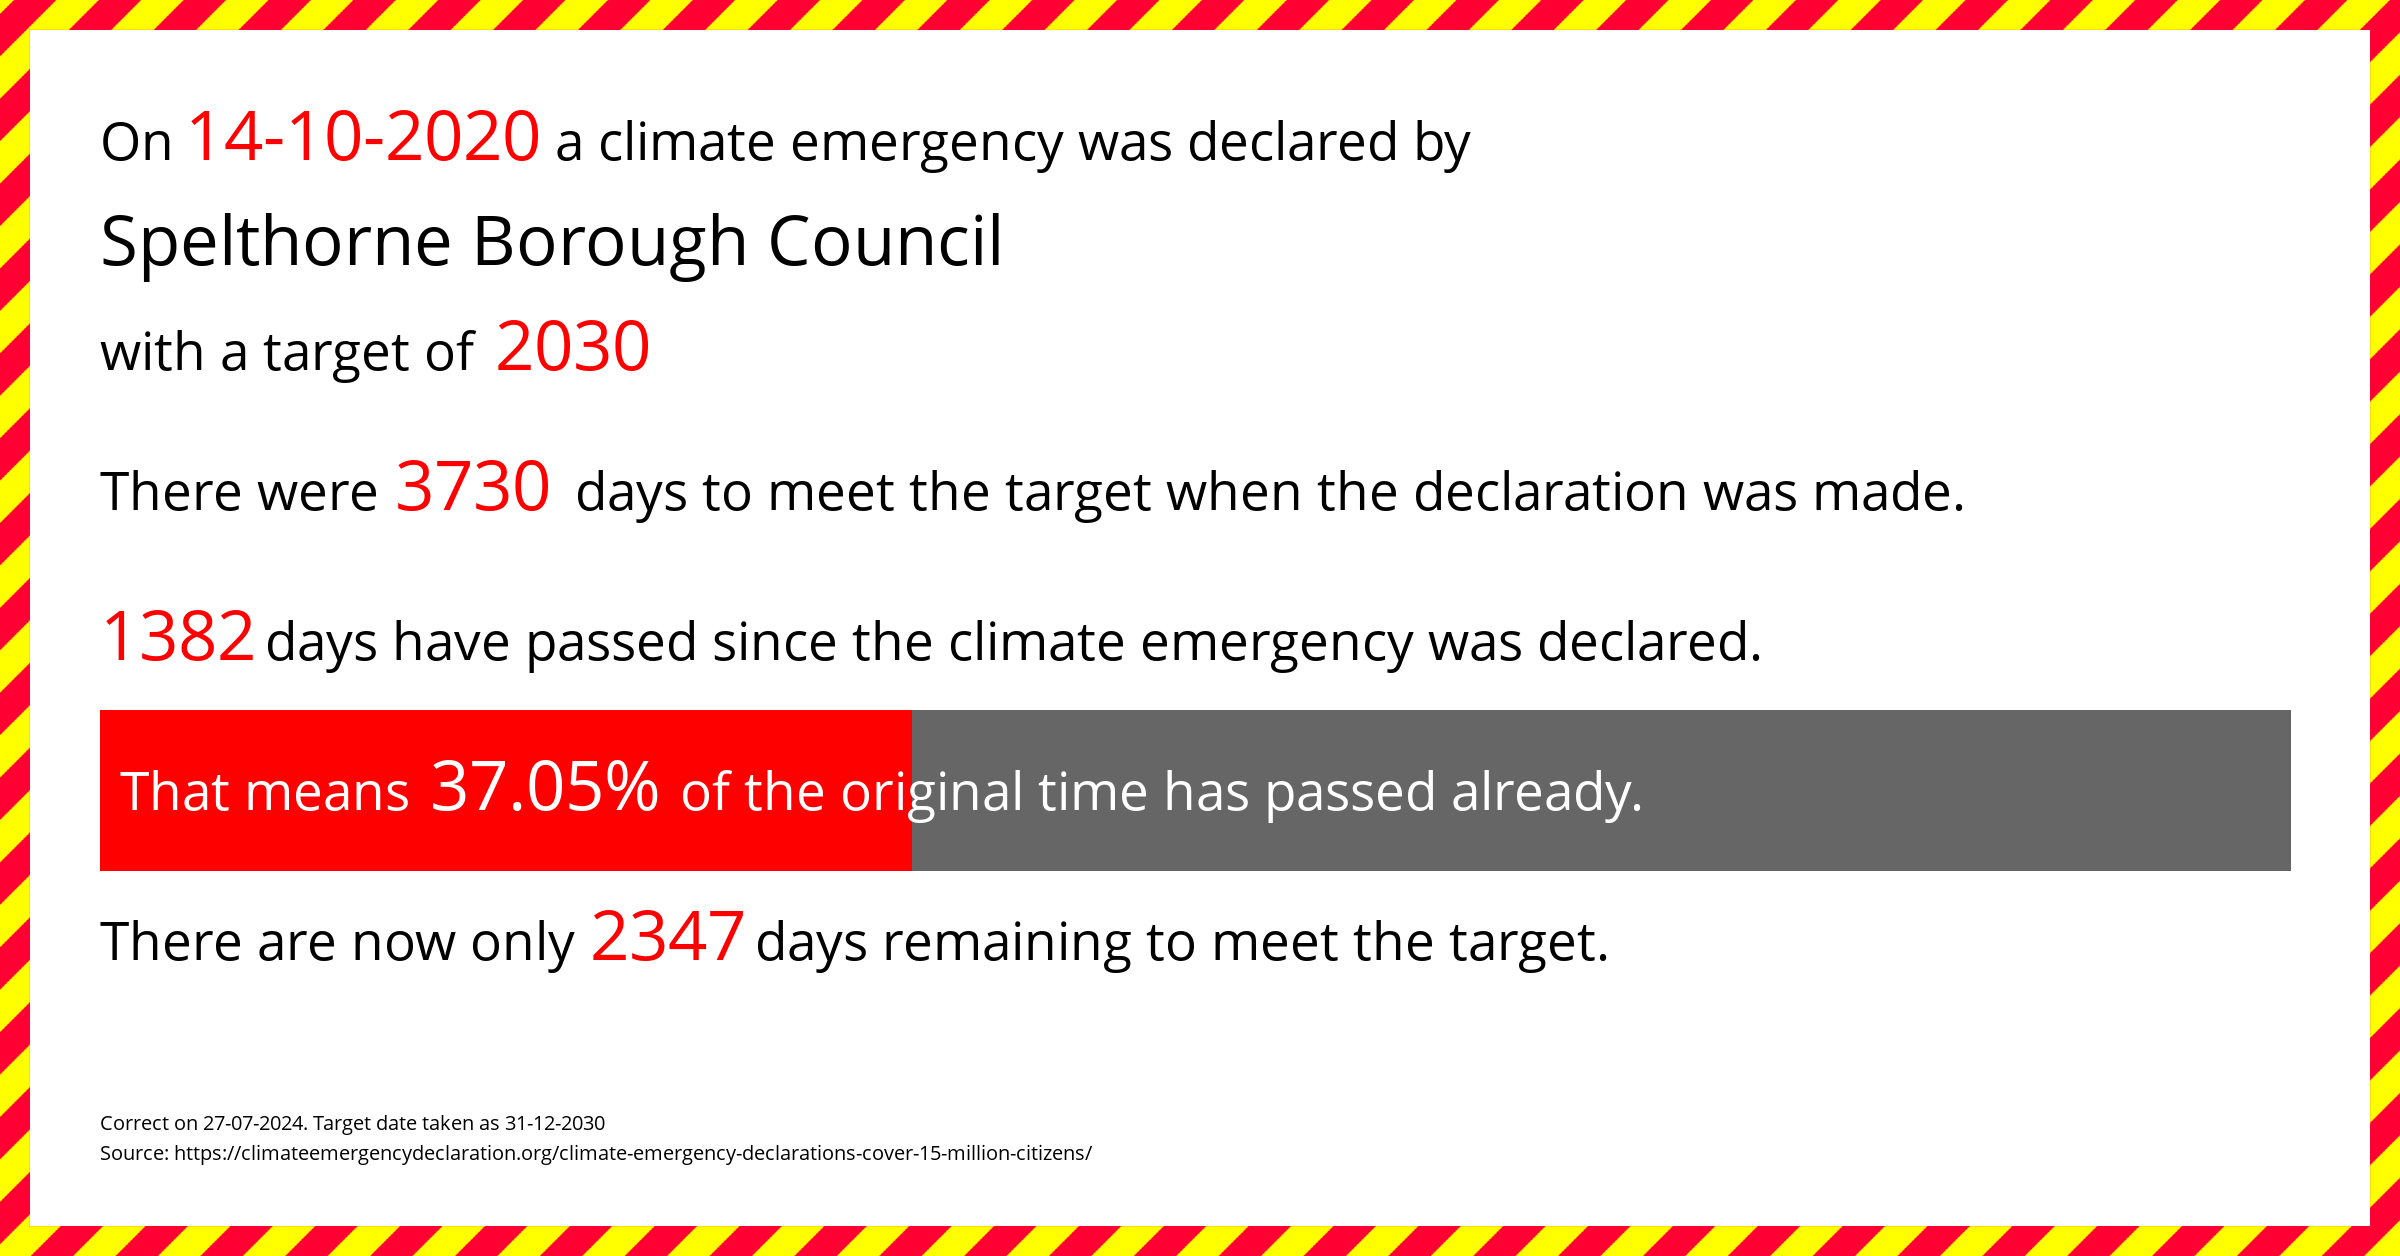 Spelthorne Borough Council  declared a Climate emergency on Wednesday 14th October 2020, with a target of 2030.